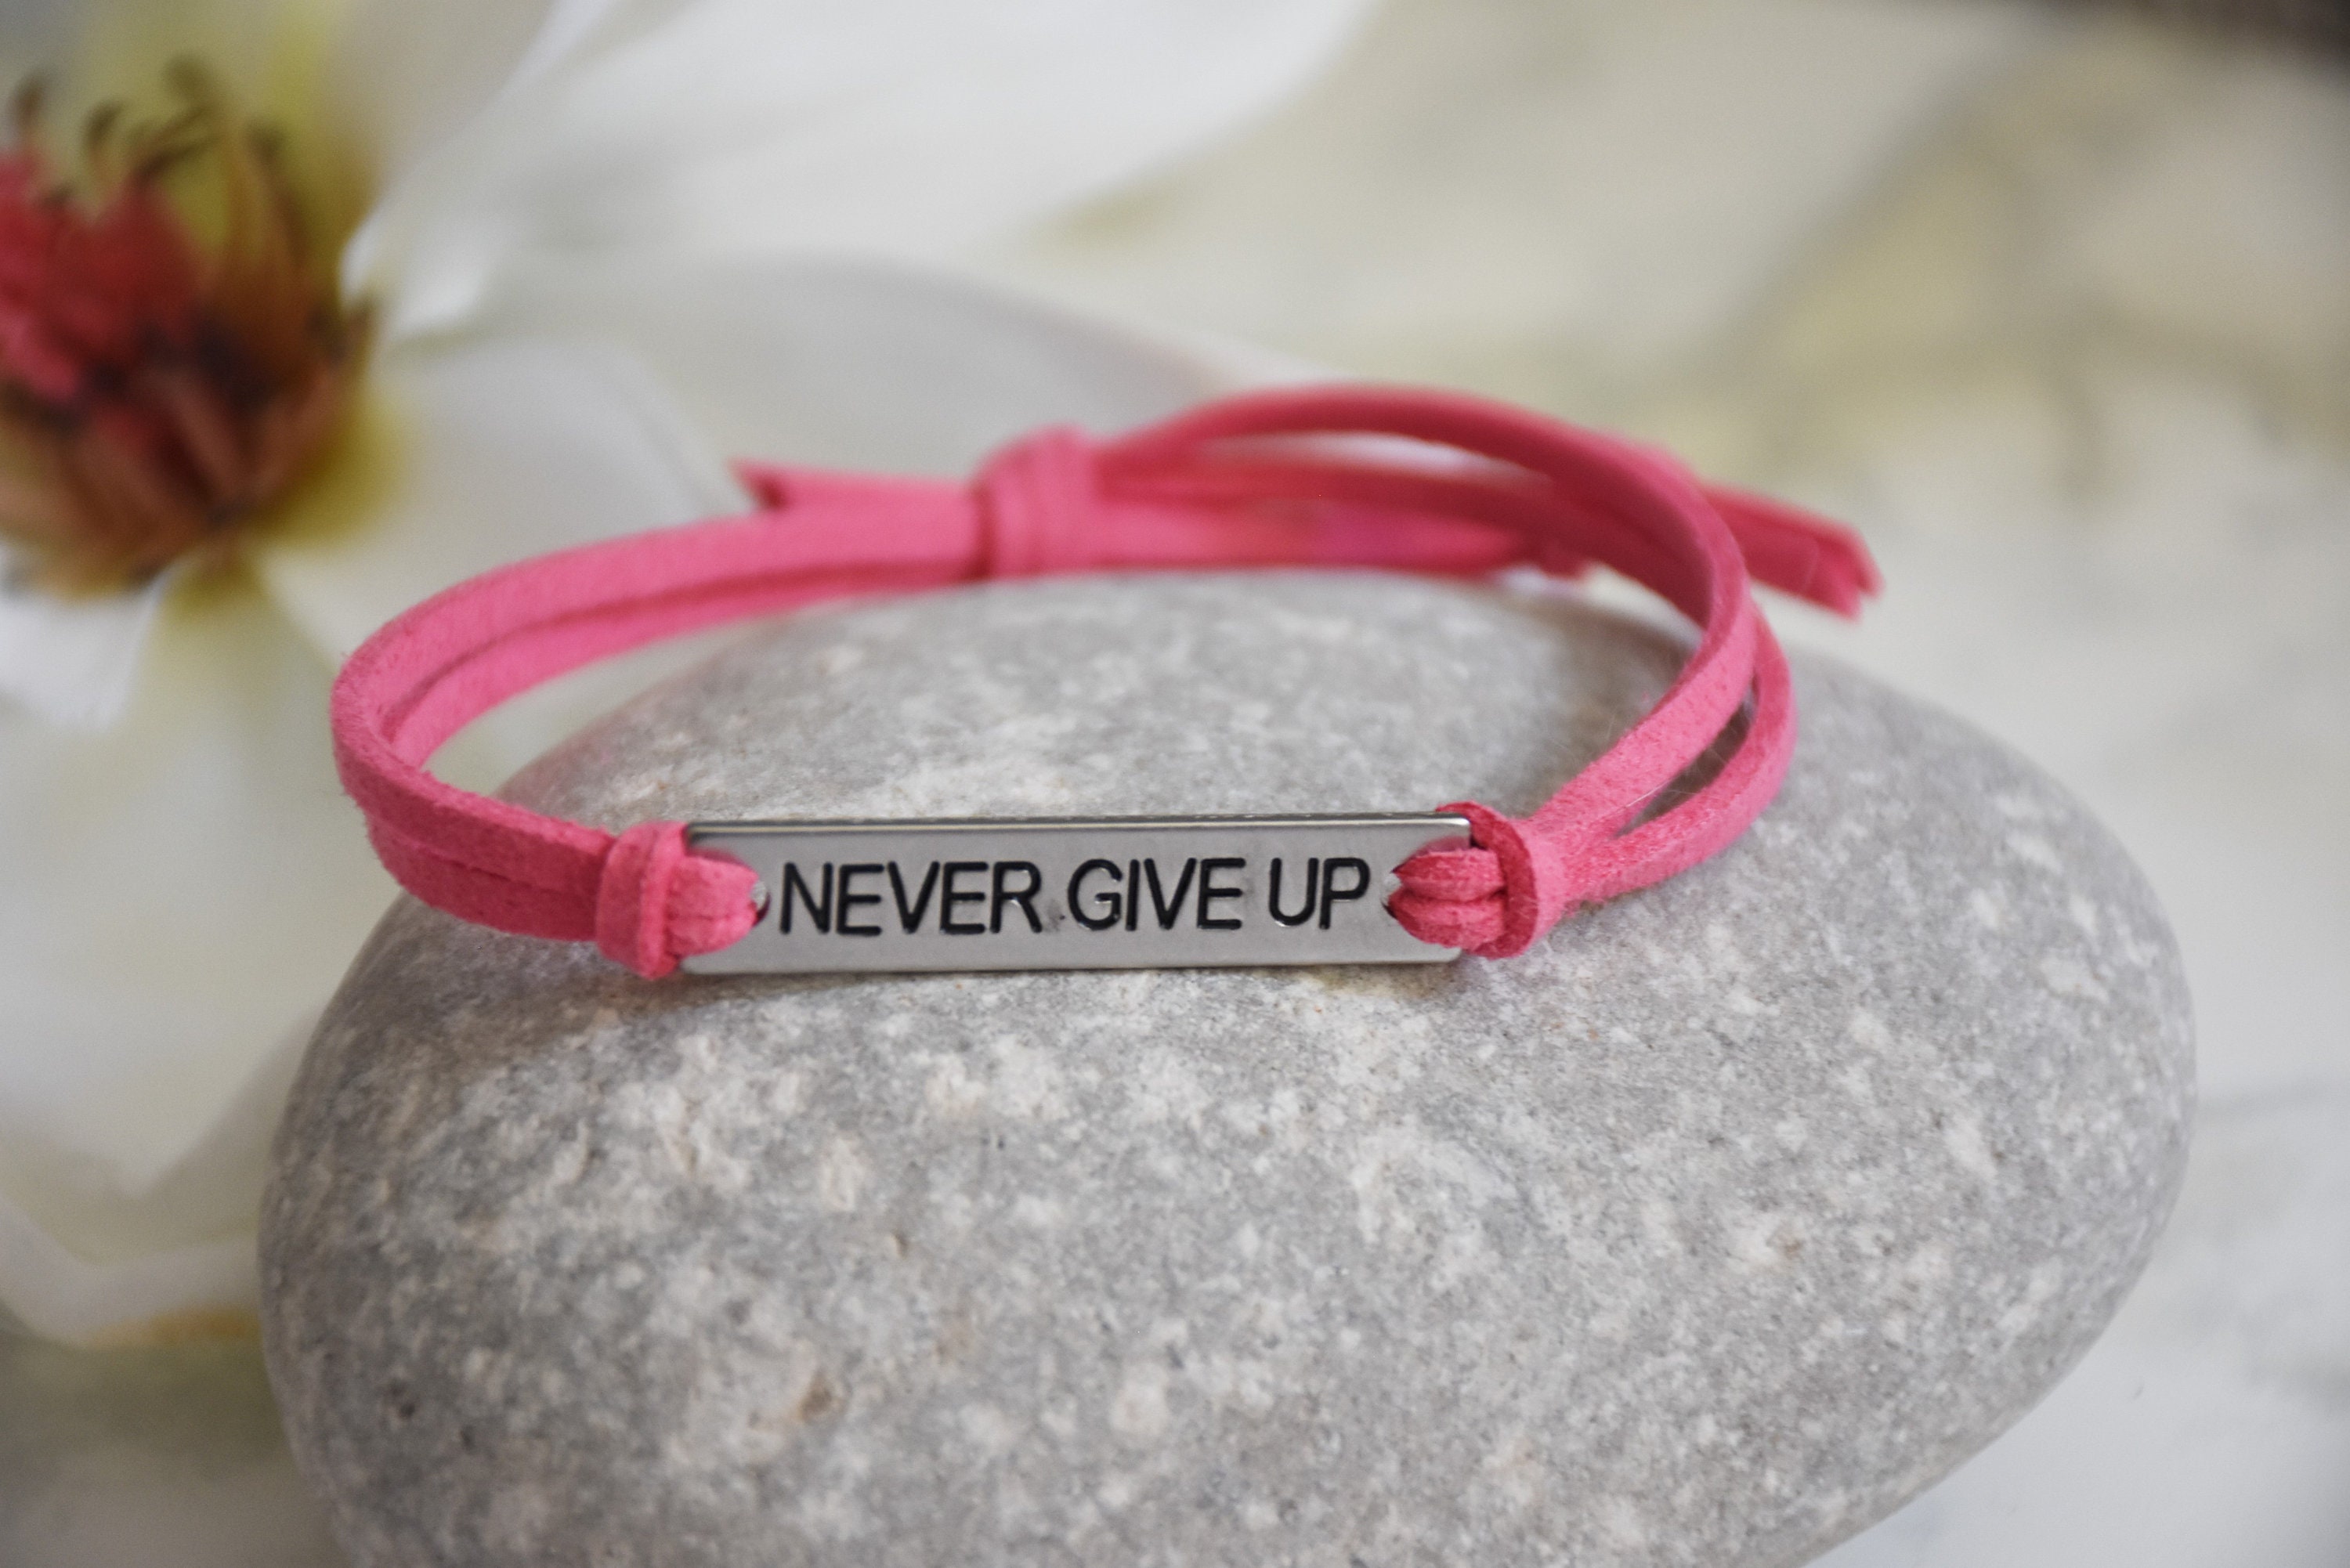 Jvvsci Just Keep Swimming Cuff Bracelet - Motivational Inspirational Message Jewelry, Courage, Don't Give Up, Move On, Sisters Best Friend BFF